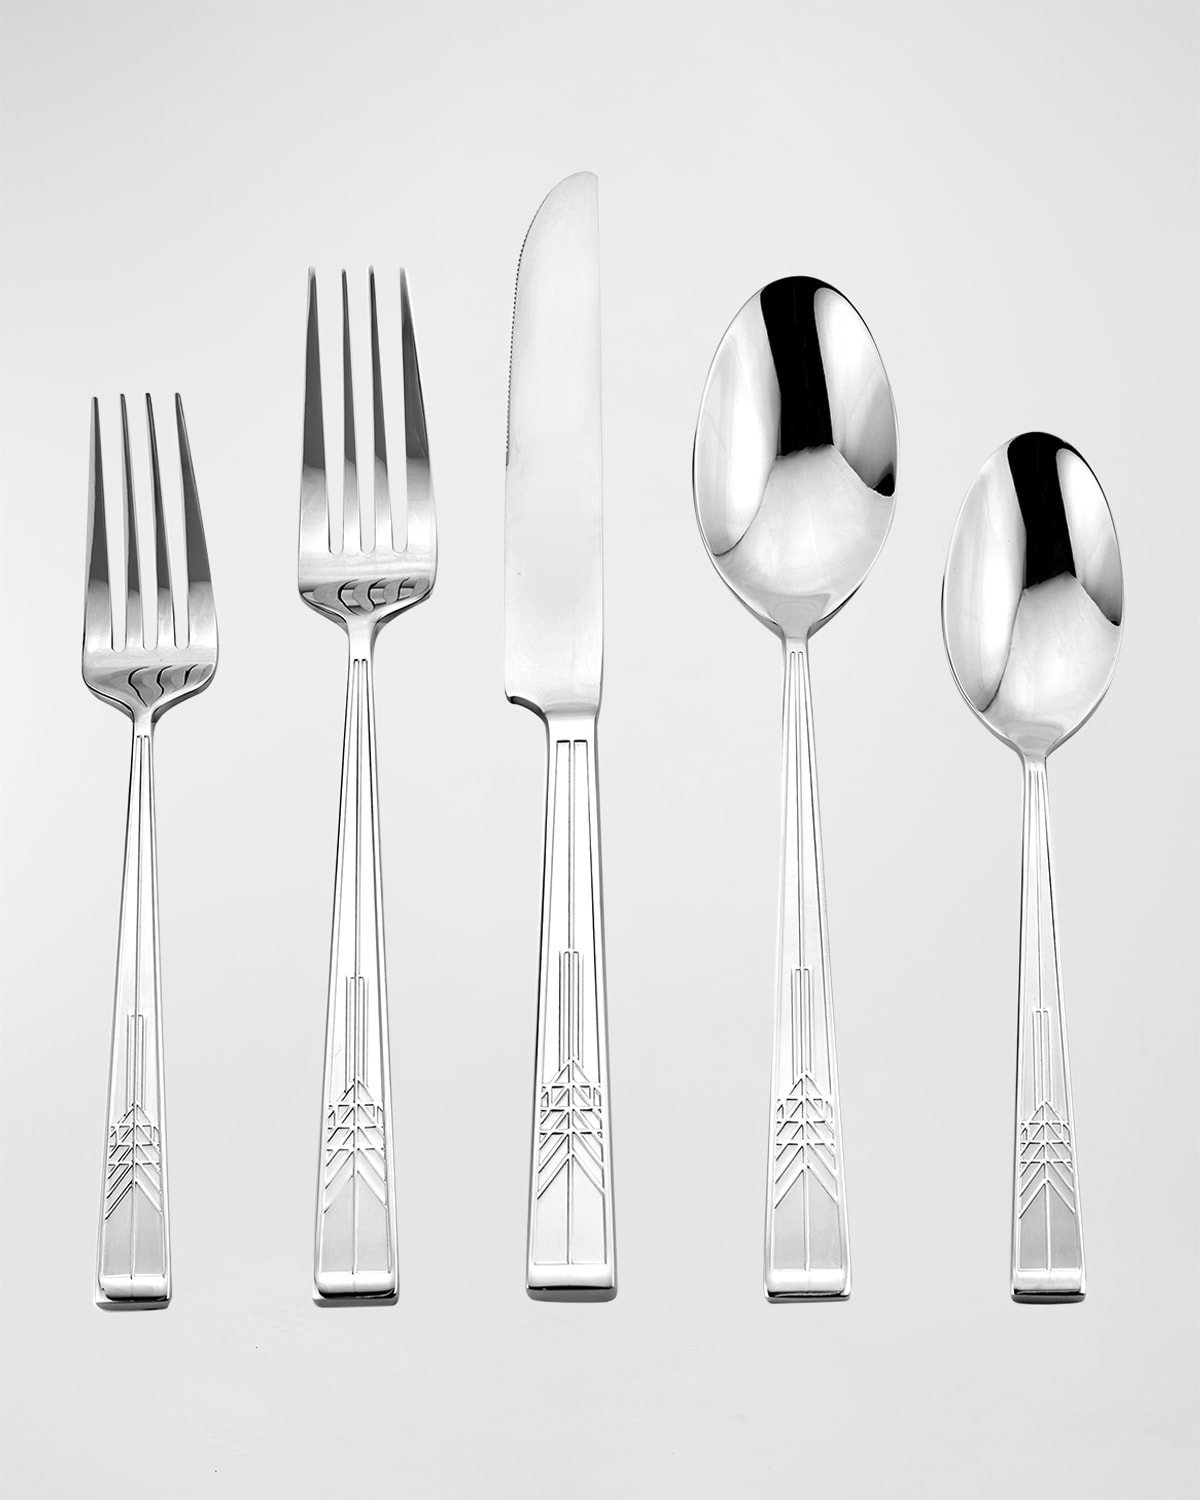 Towle Living Flamingo Flatware Set 20-Piece Stainless Steel